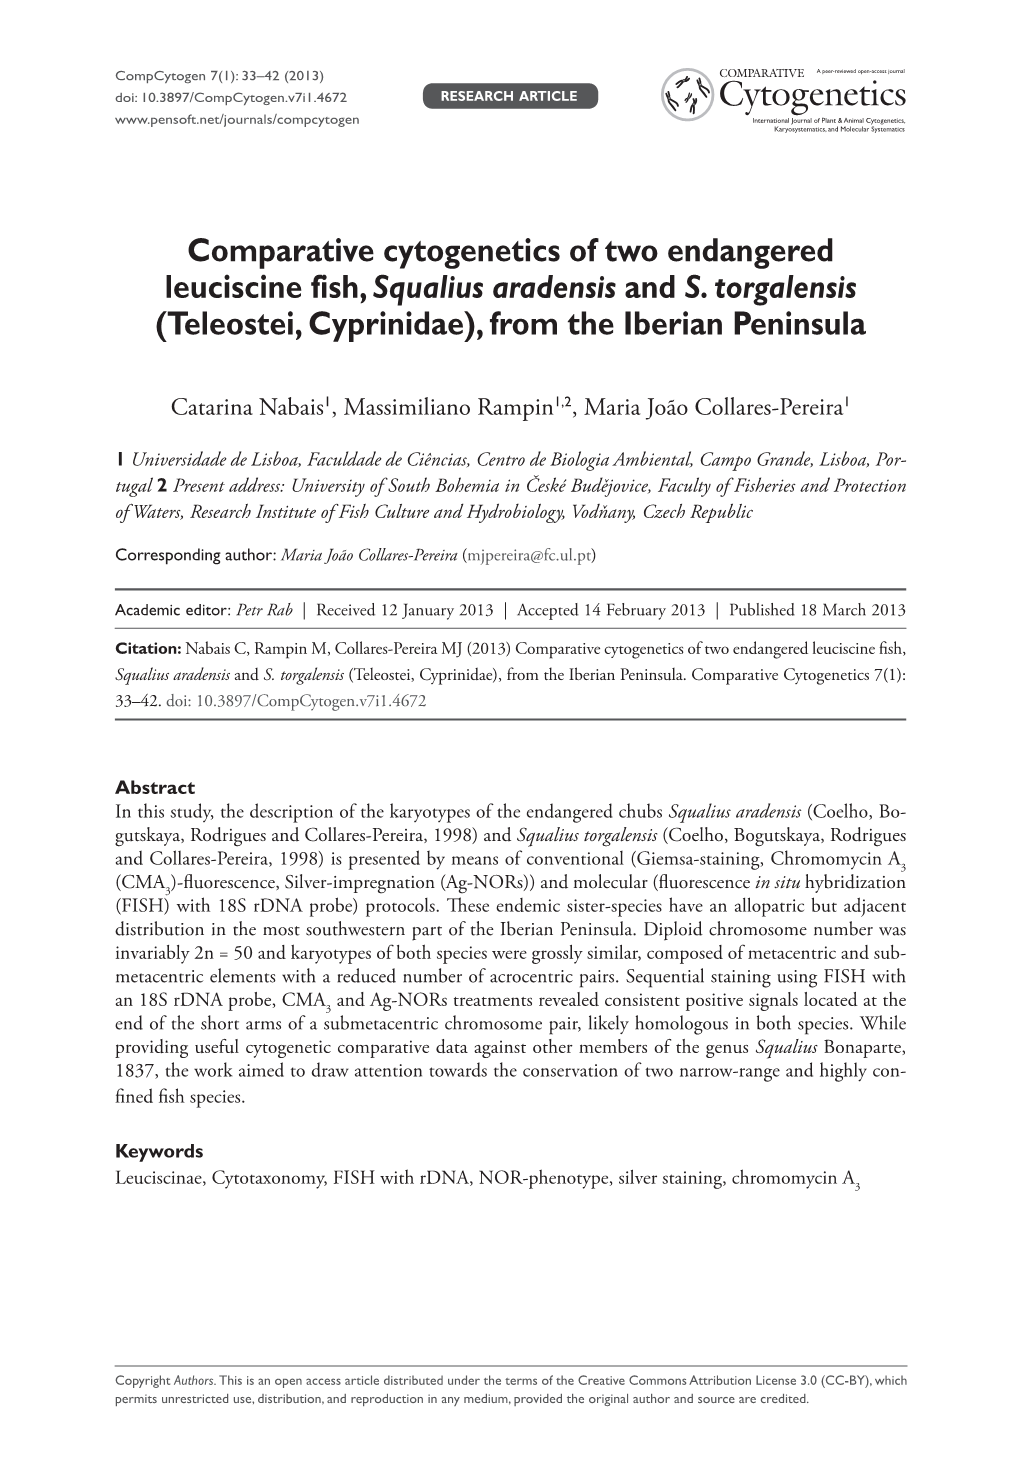 Comparative Cytogenetics of Two Endangered Leuciscine Fish, Squalius Aradensis and S